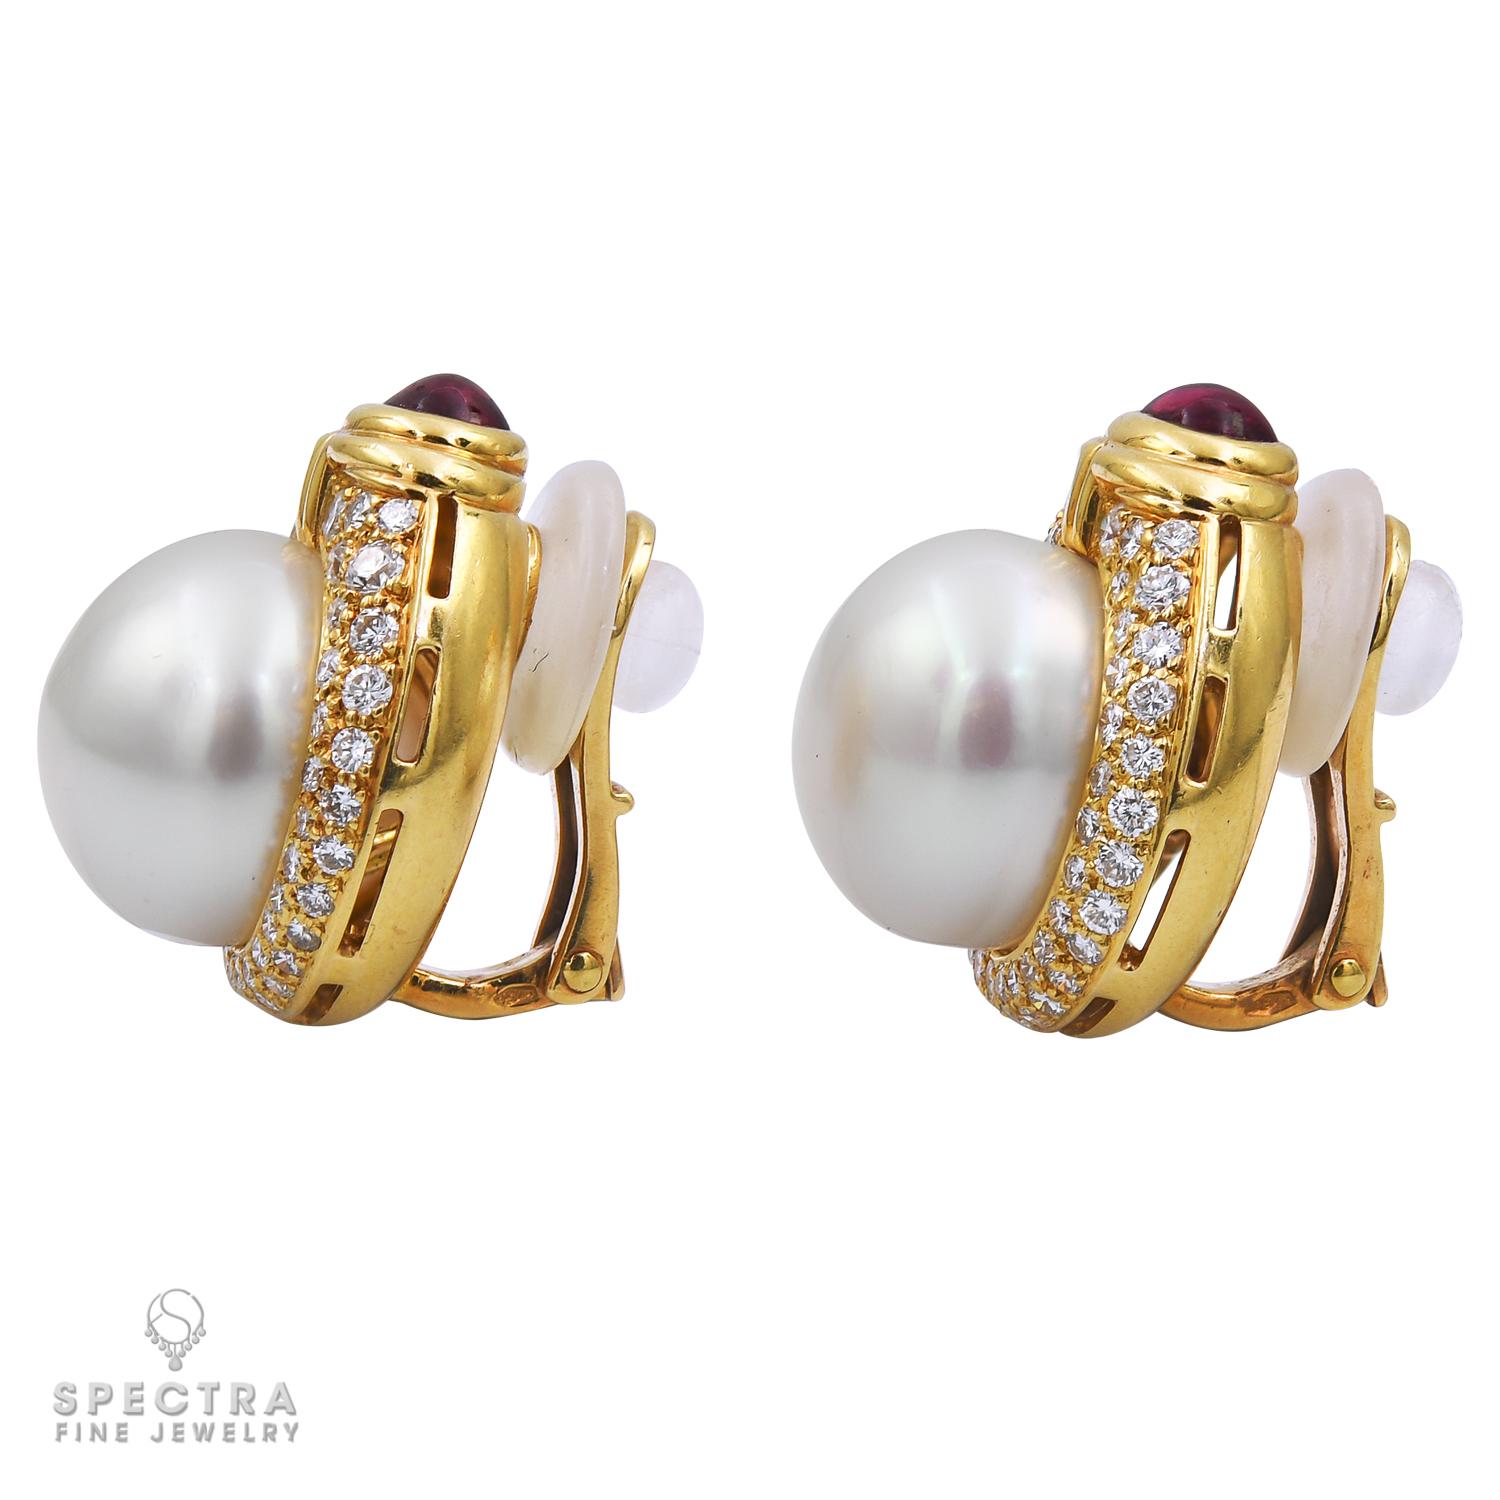 A beautiful pair of ear clips made by Bvlgari.
Each ear clip features a pearl center accented by diamonds with a cabochon ruby on top. 
Diamonds are approximately G color, VS clarity.
Each ear clip measures 0.6x0.8 inches.
Signed Bvlgari.
Stamped